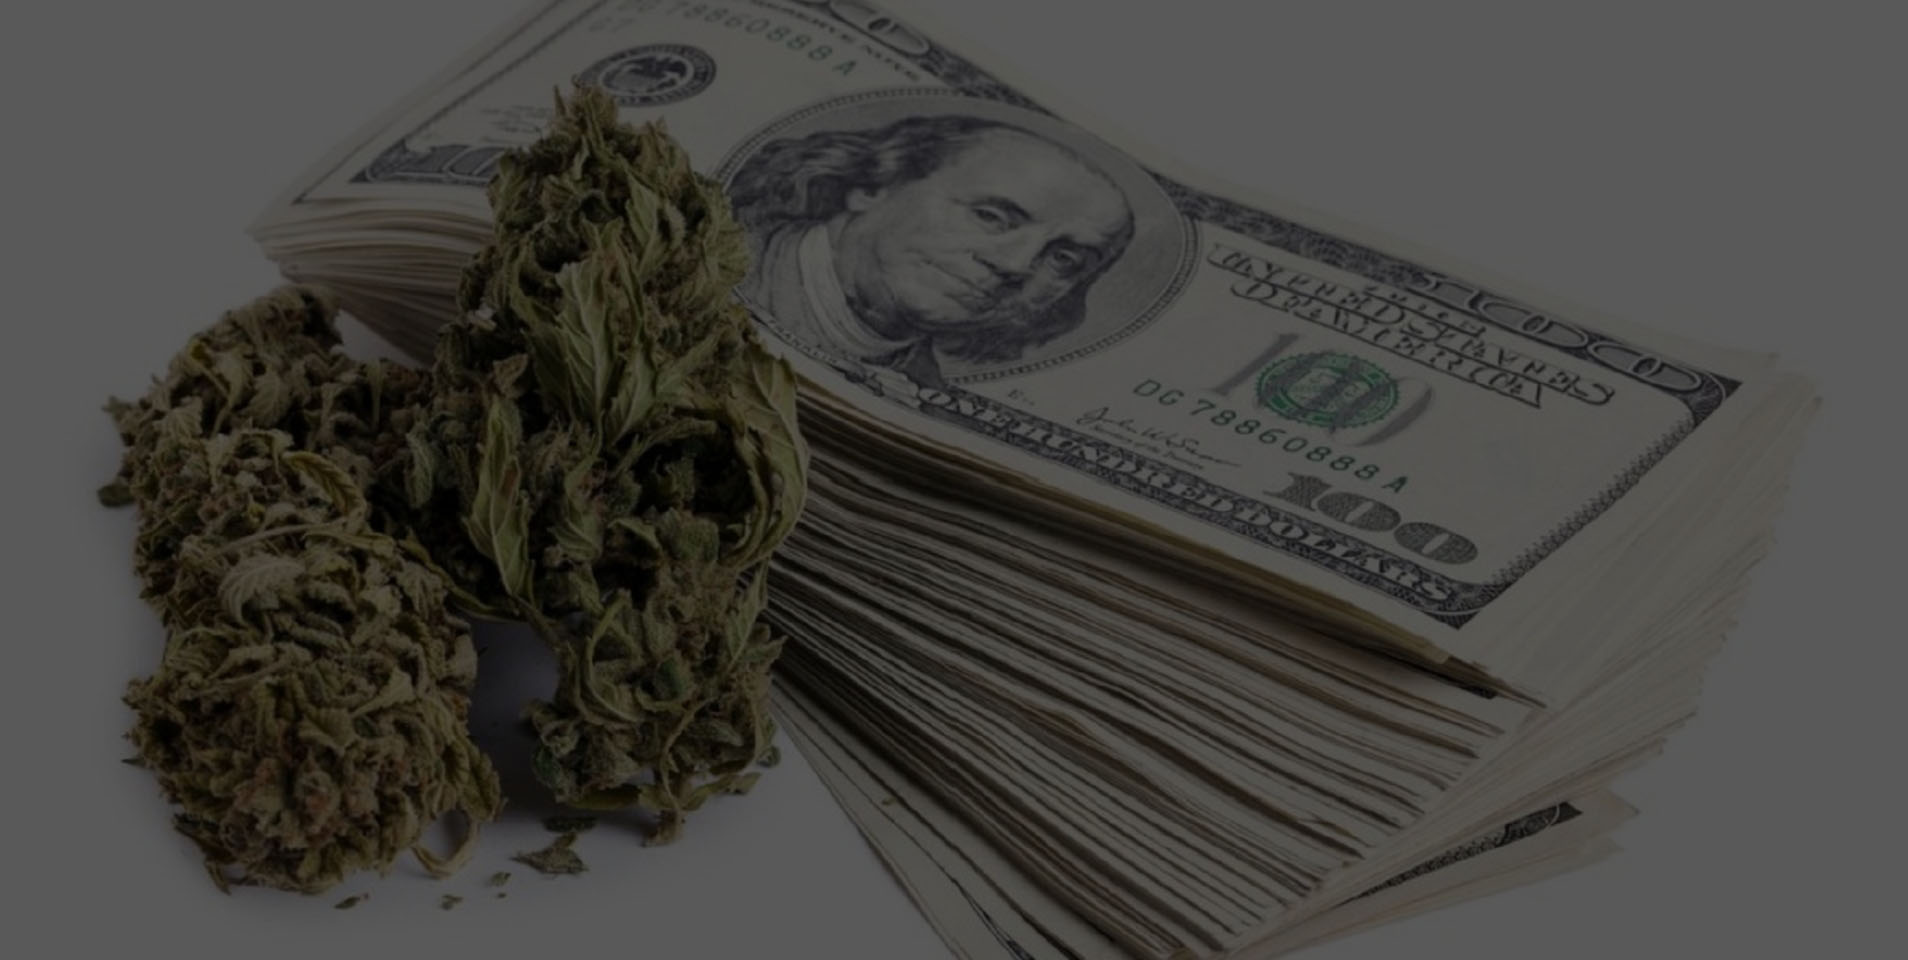 OREGON RACKS UP $60M IN REC CANNABIS SALES FROM JANUARY THRU MAY